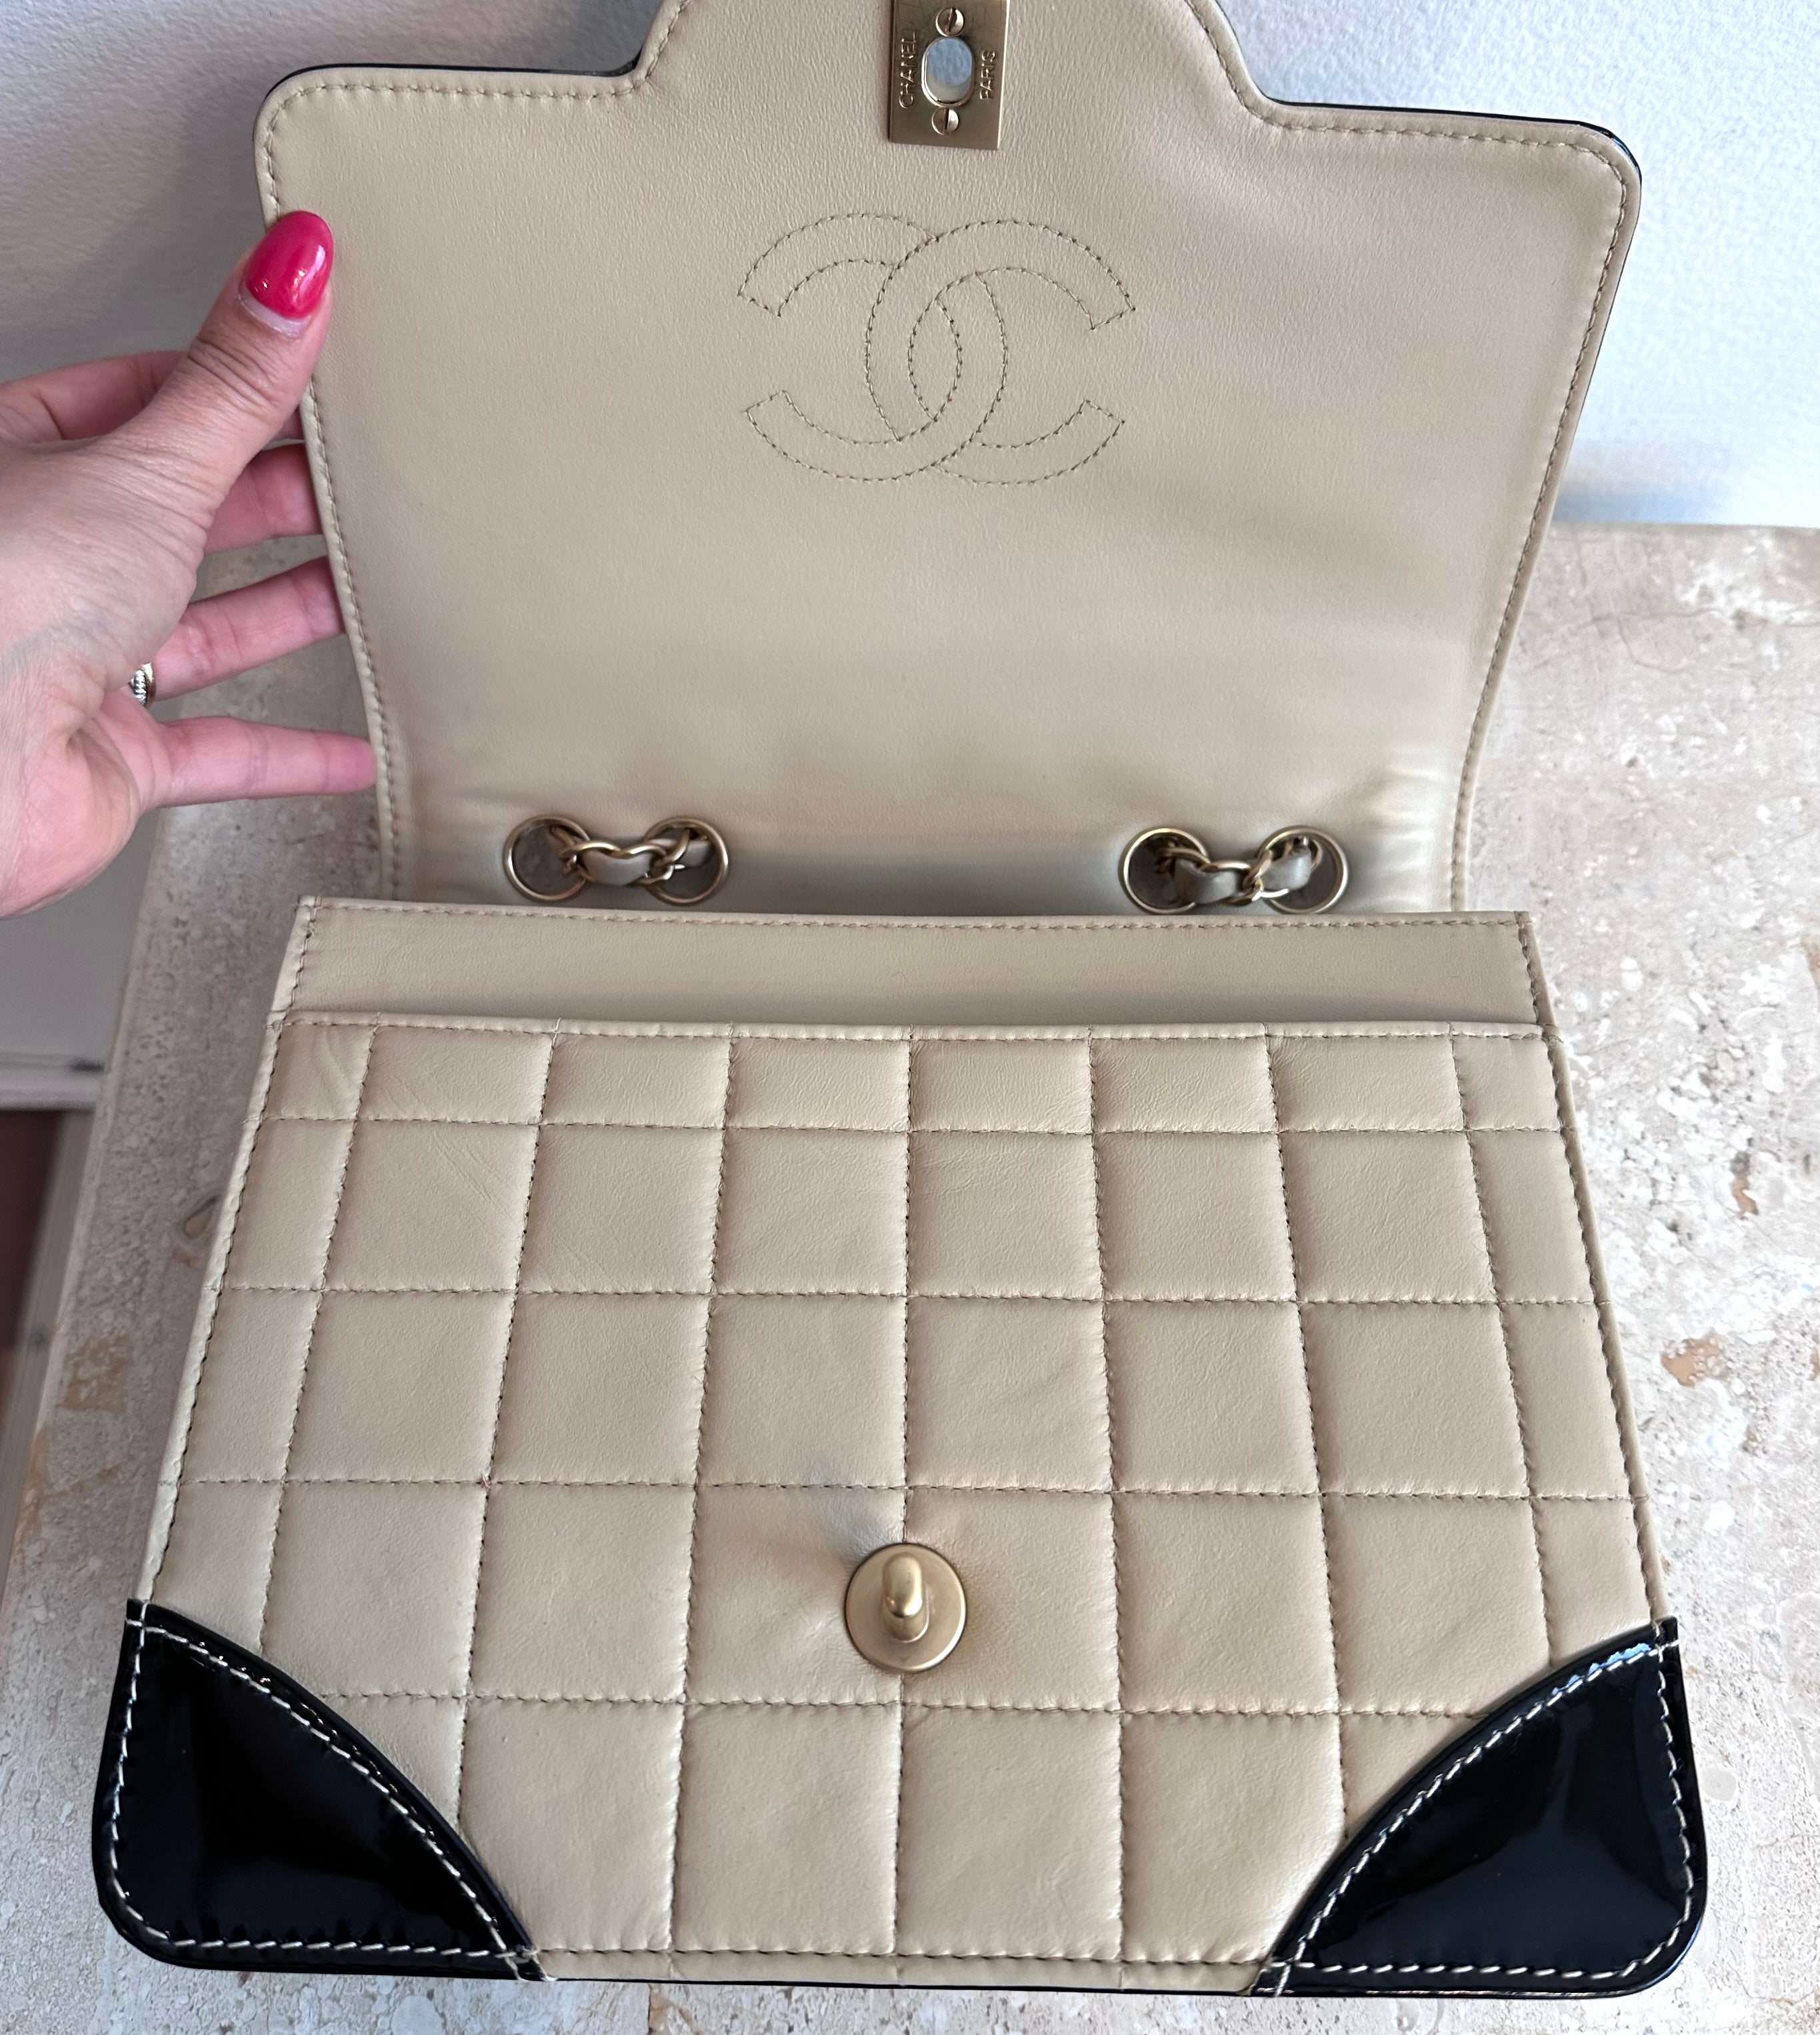 Pre-Owned CHANEL Beige Lambskin Patent Chocolate Bar Flap Bag